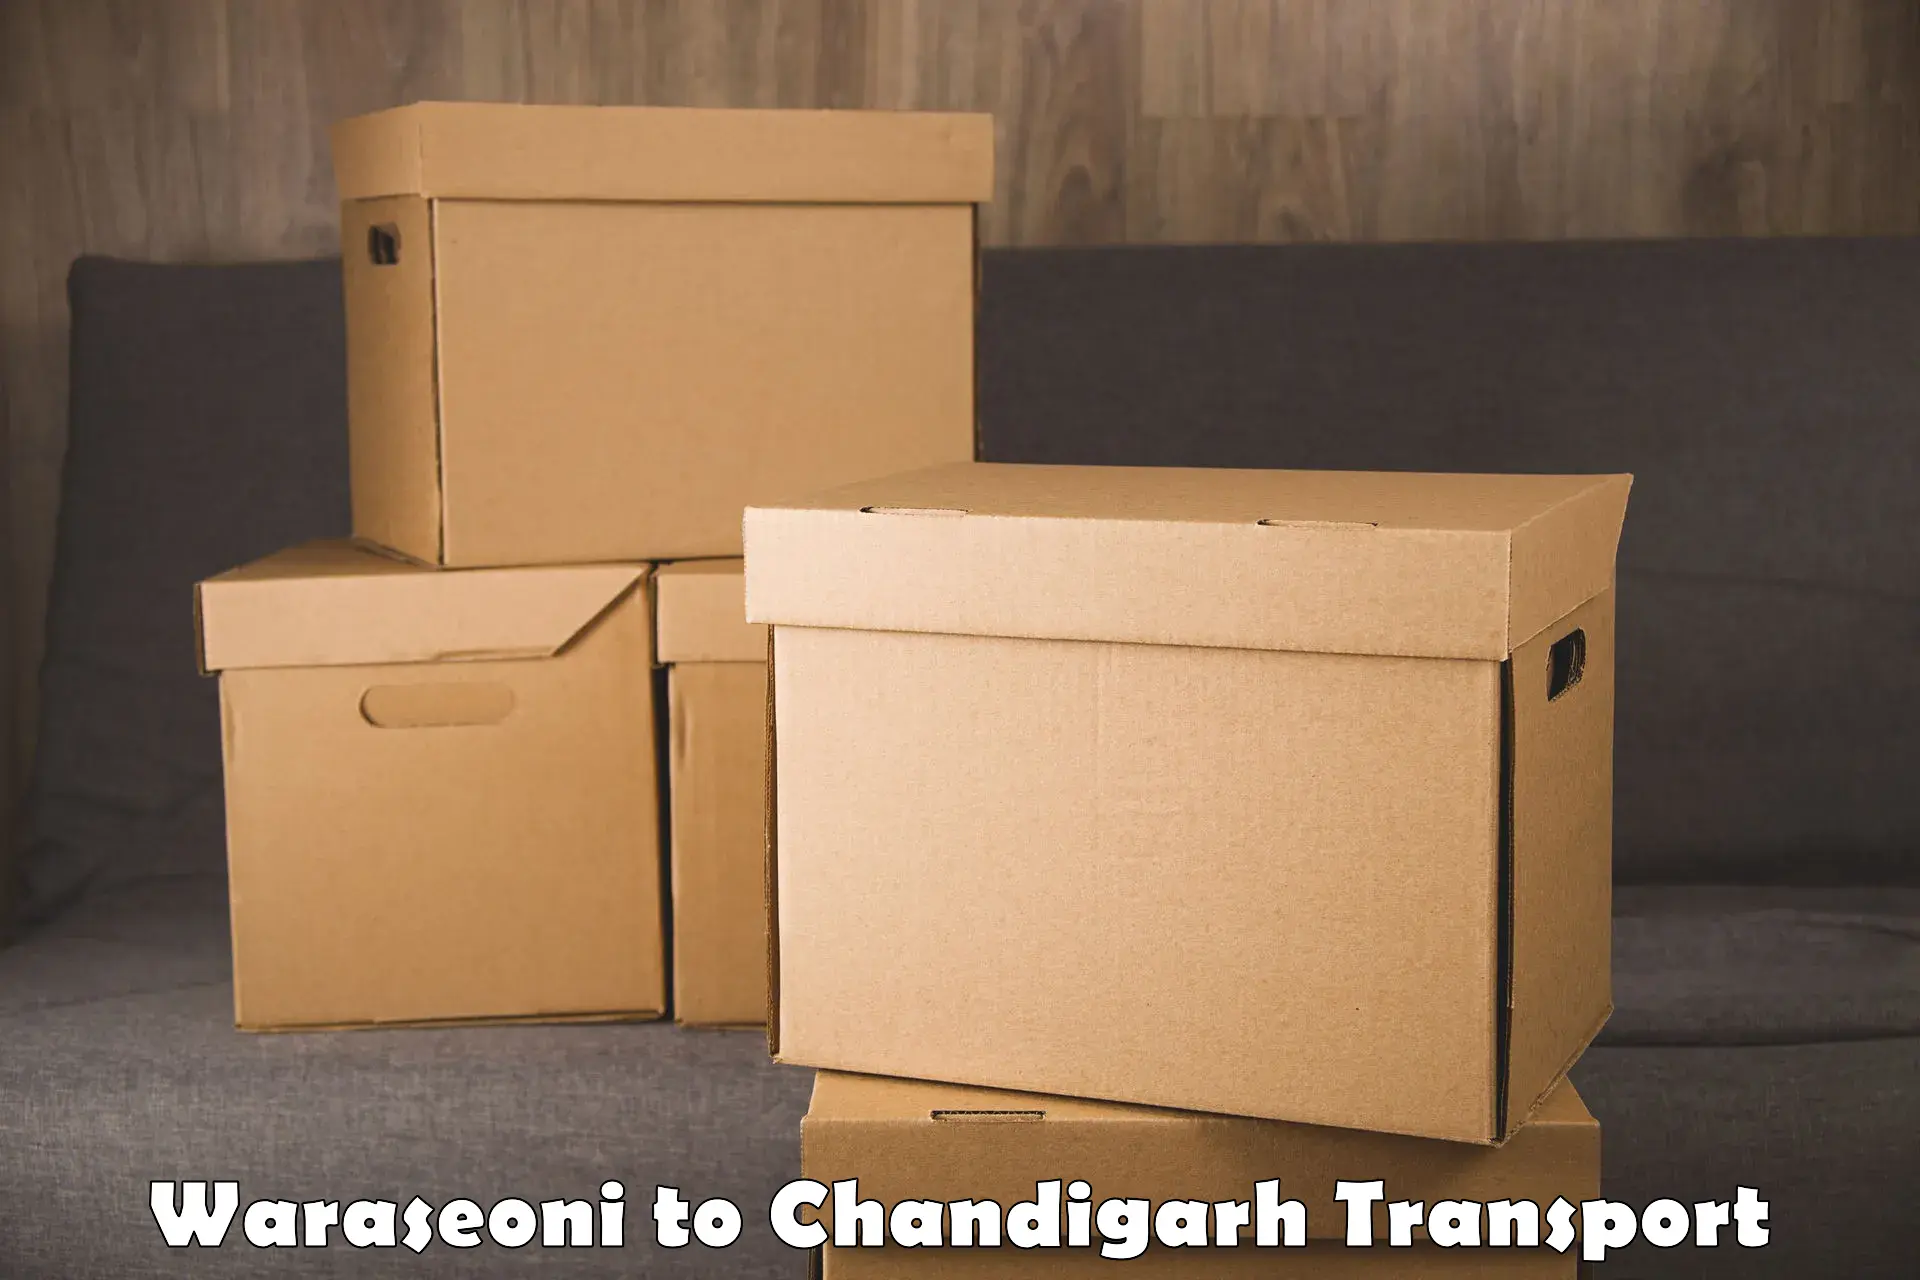 Delivery service Waraseoni to Chandigarh